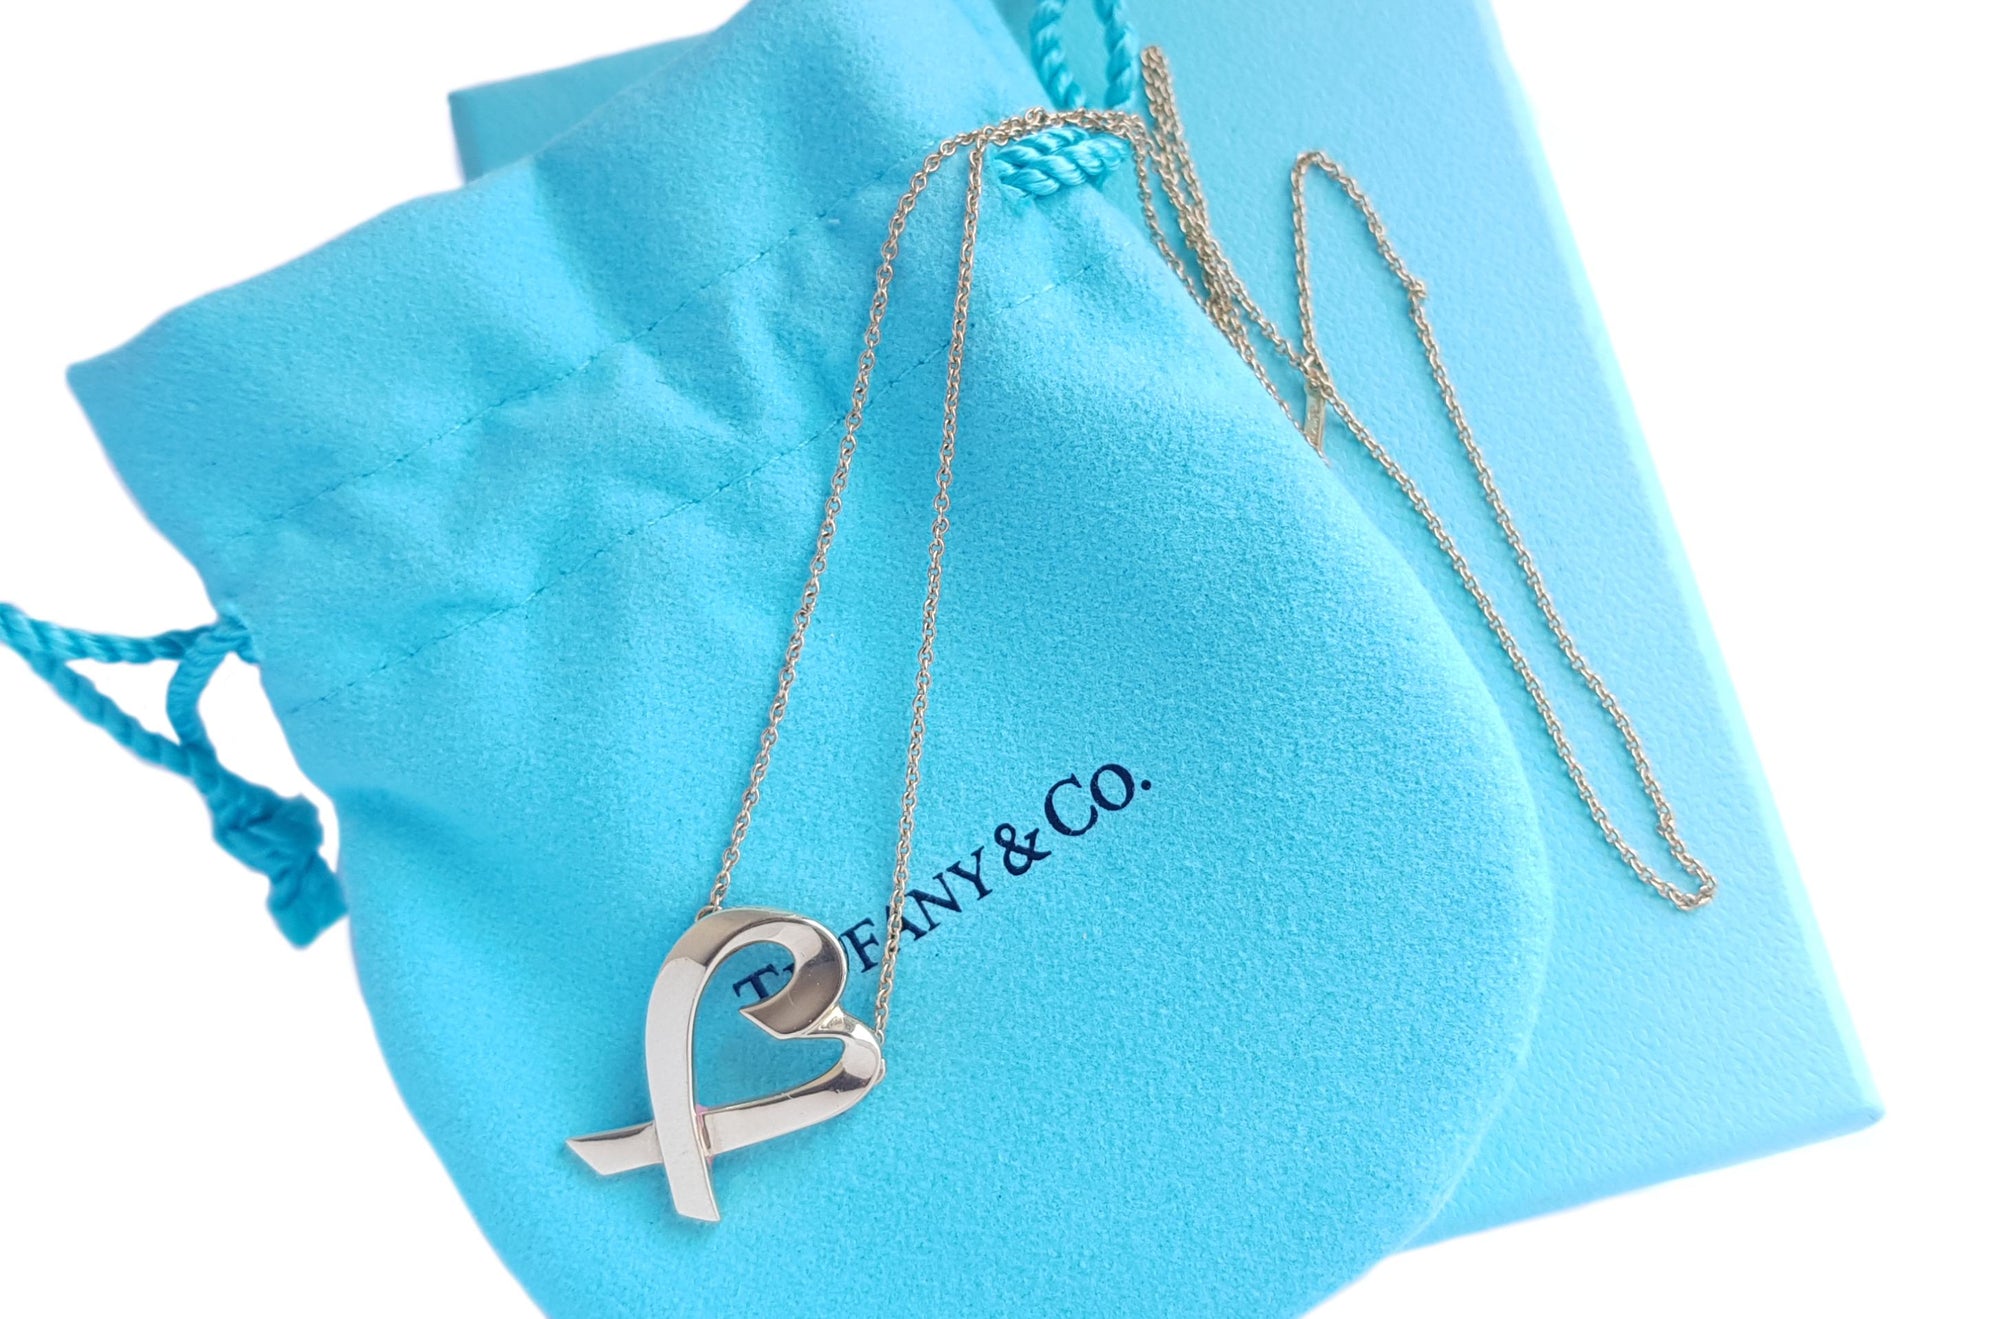 Tiffany & Co Paloma Picasso Loving Heart 750 (Gold) Necklace 18" Large